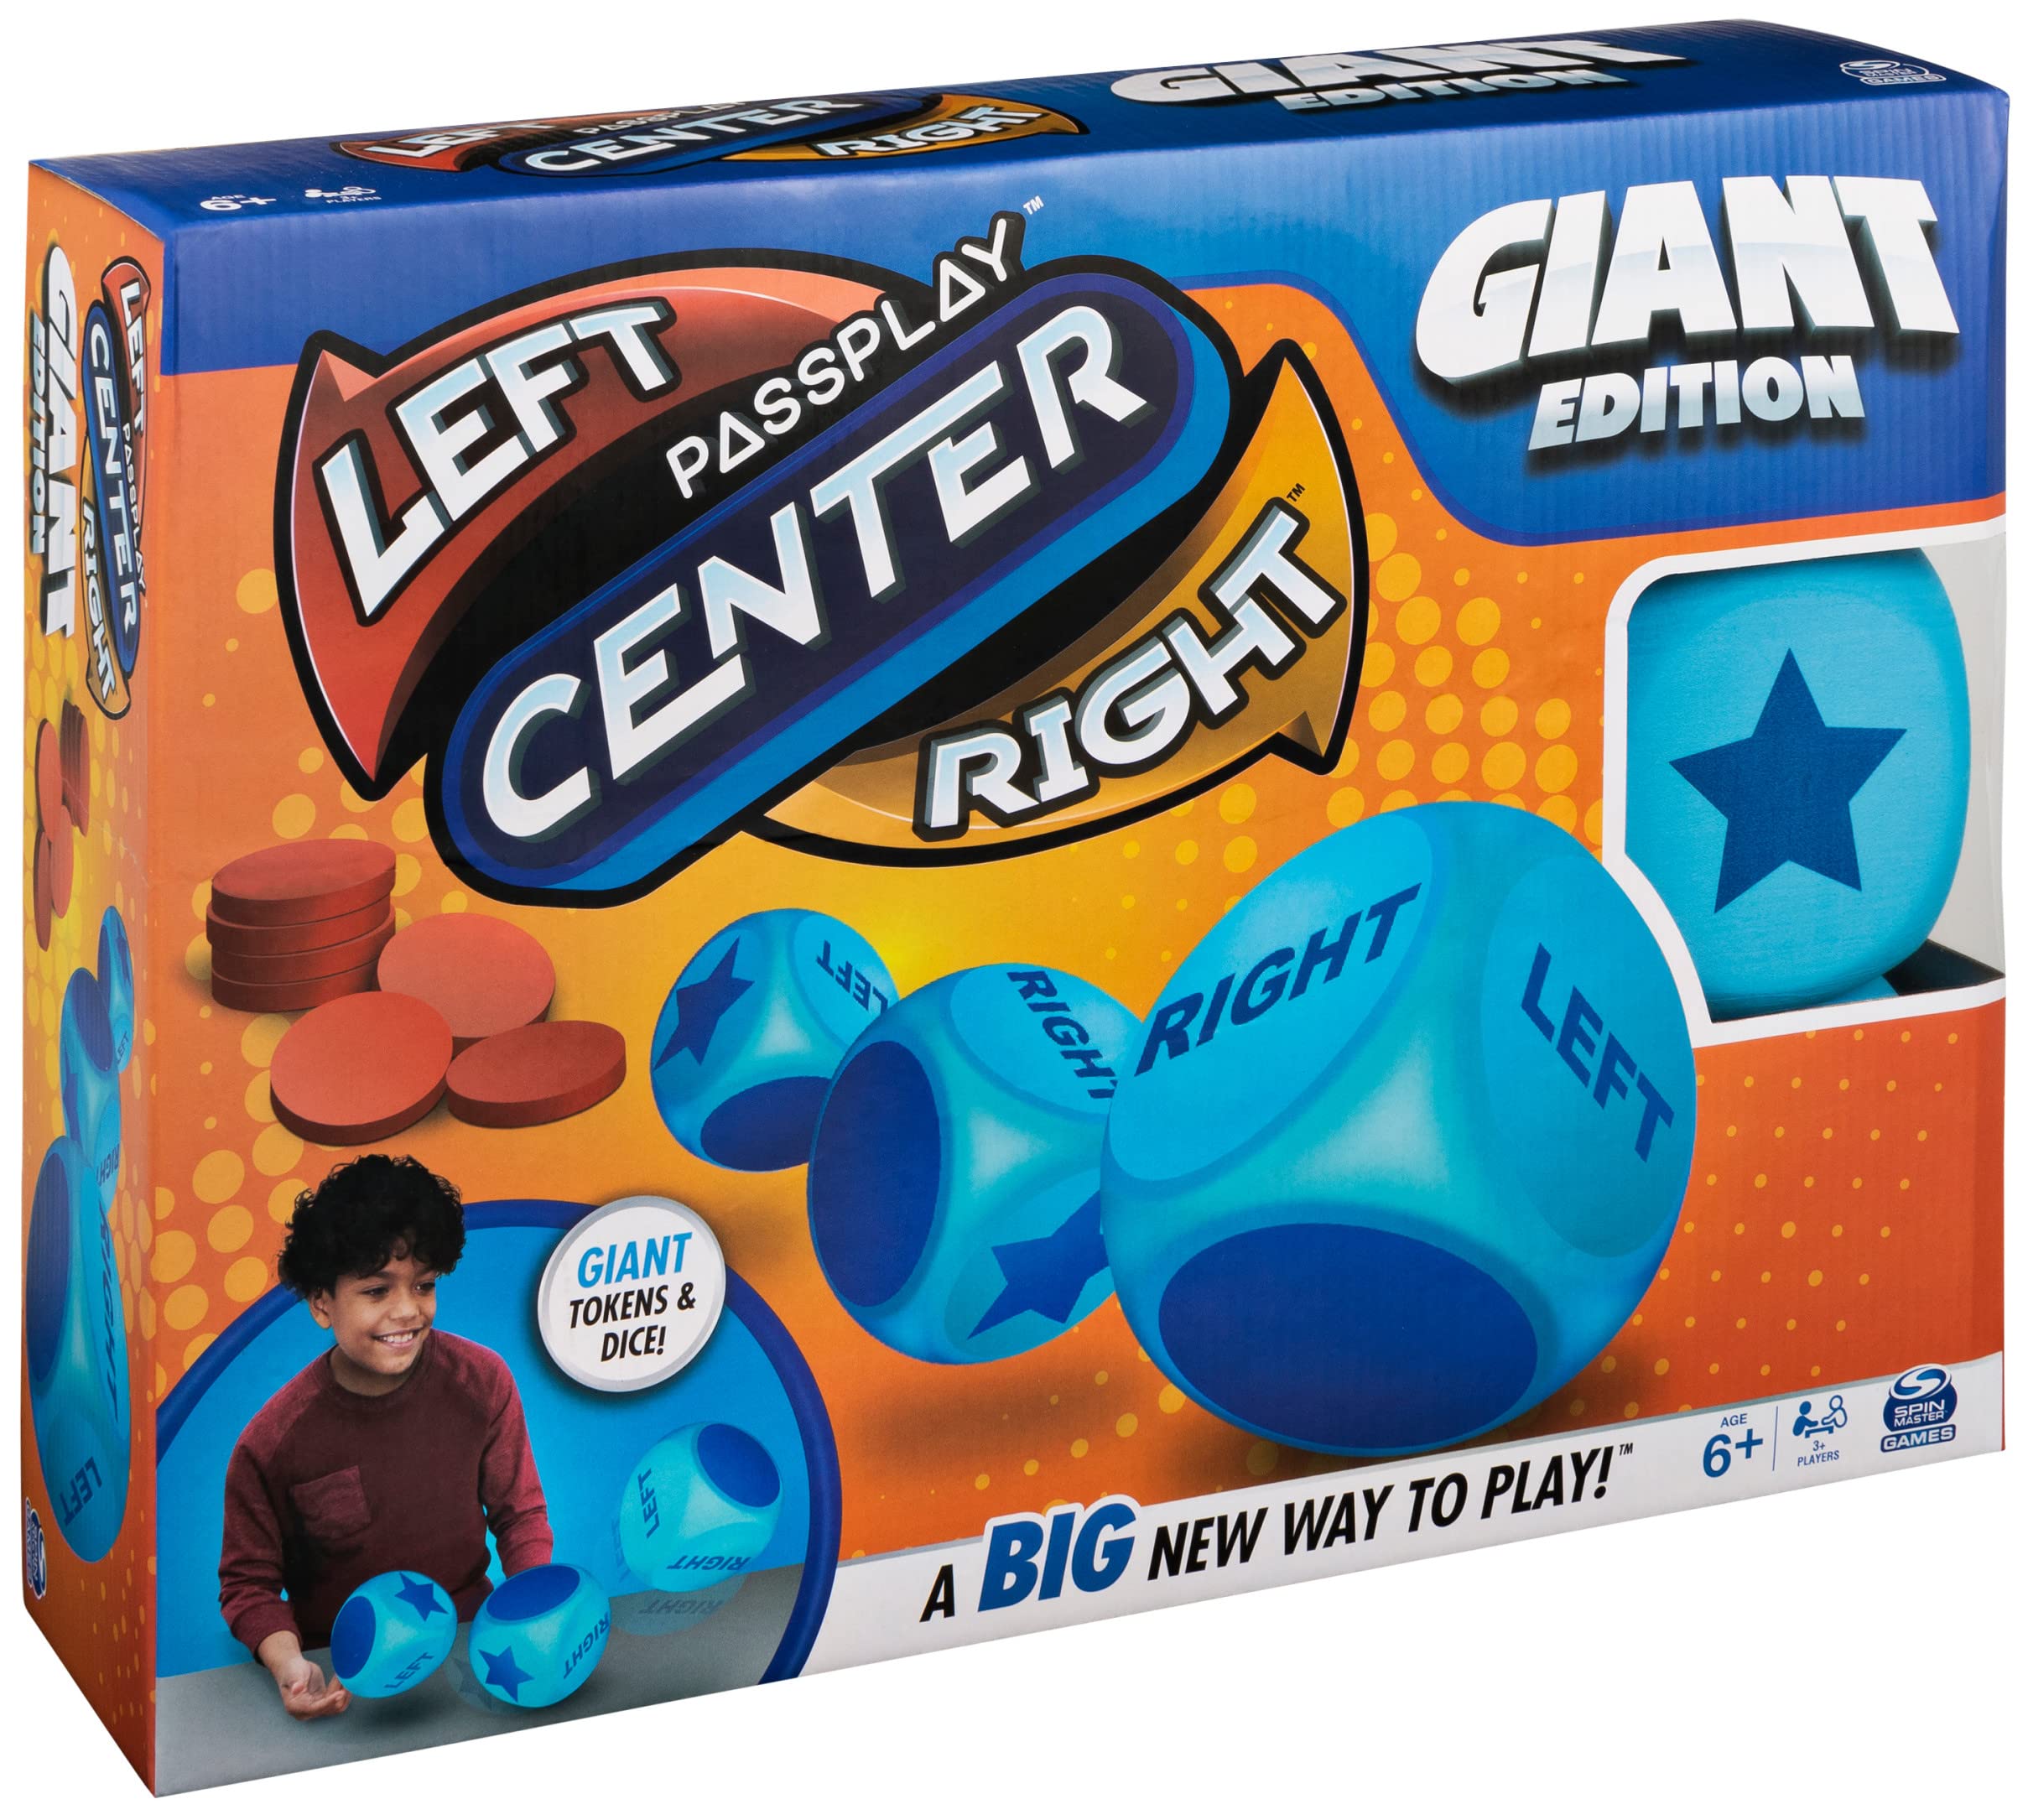 Giant Left Center Right, Classic Family Board Game Summer Toy with Big, Oversized Dice & Tokens, for Kids and Adults Ages 6 and up